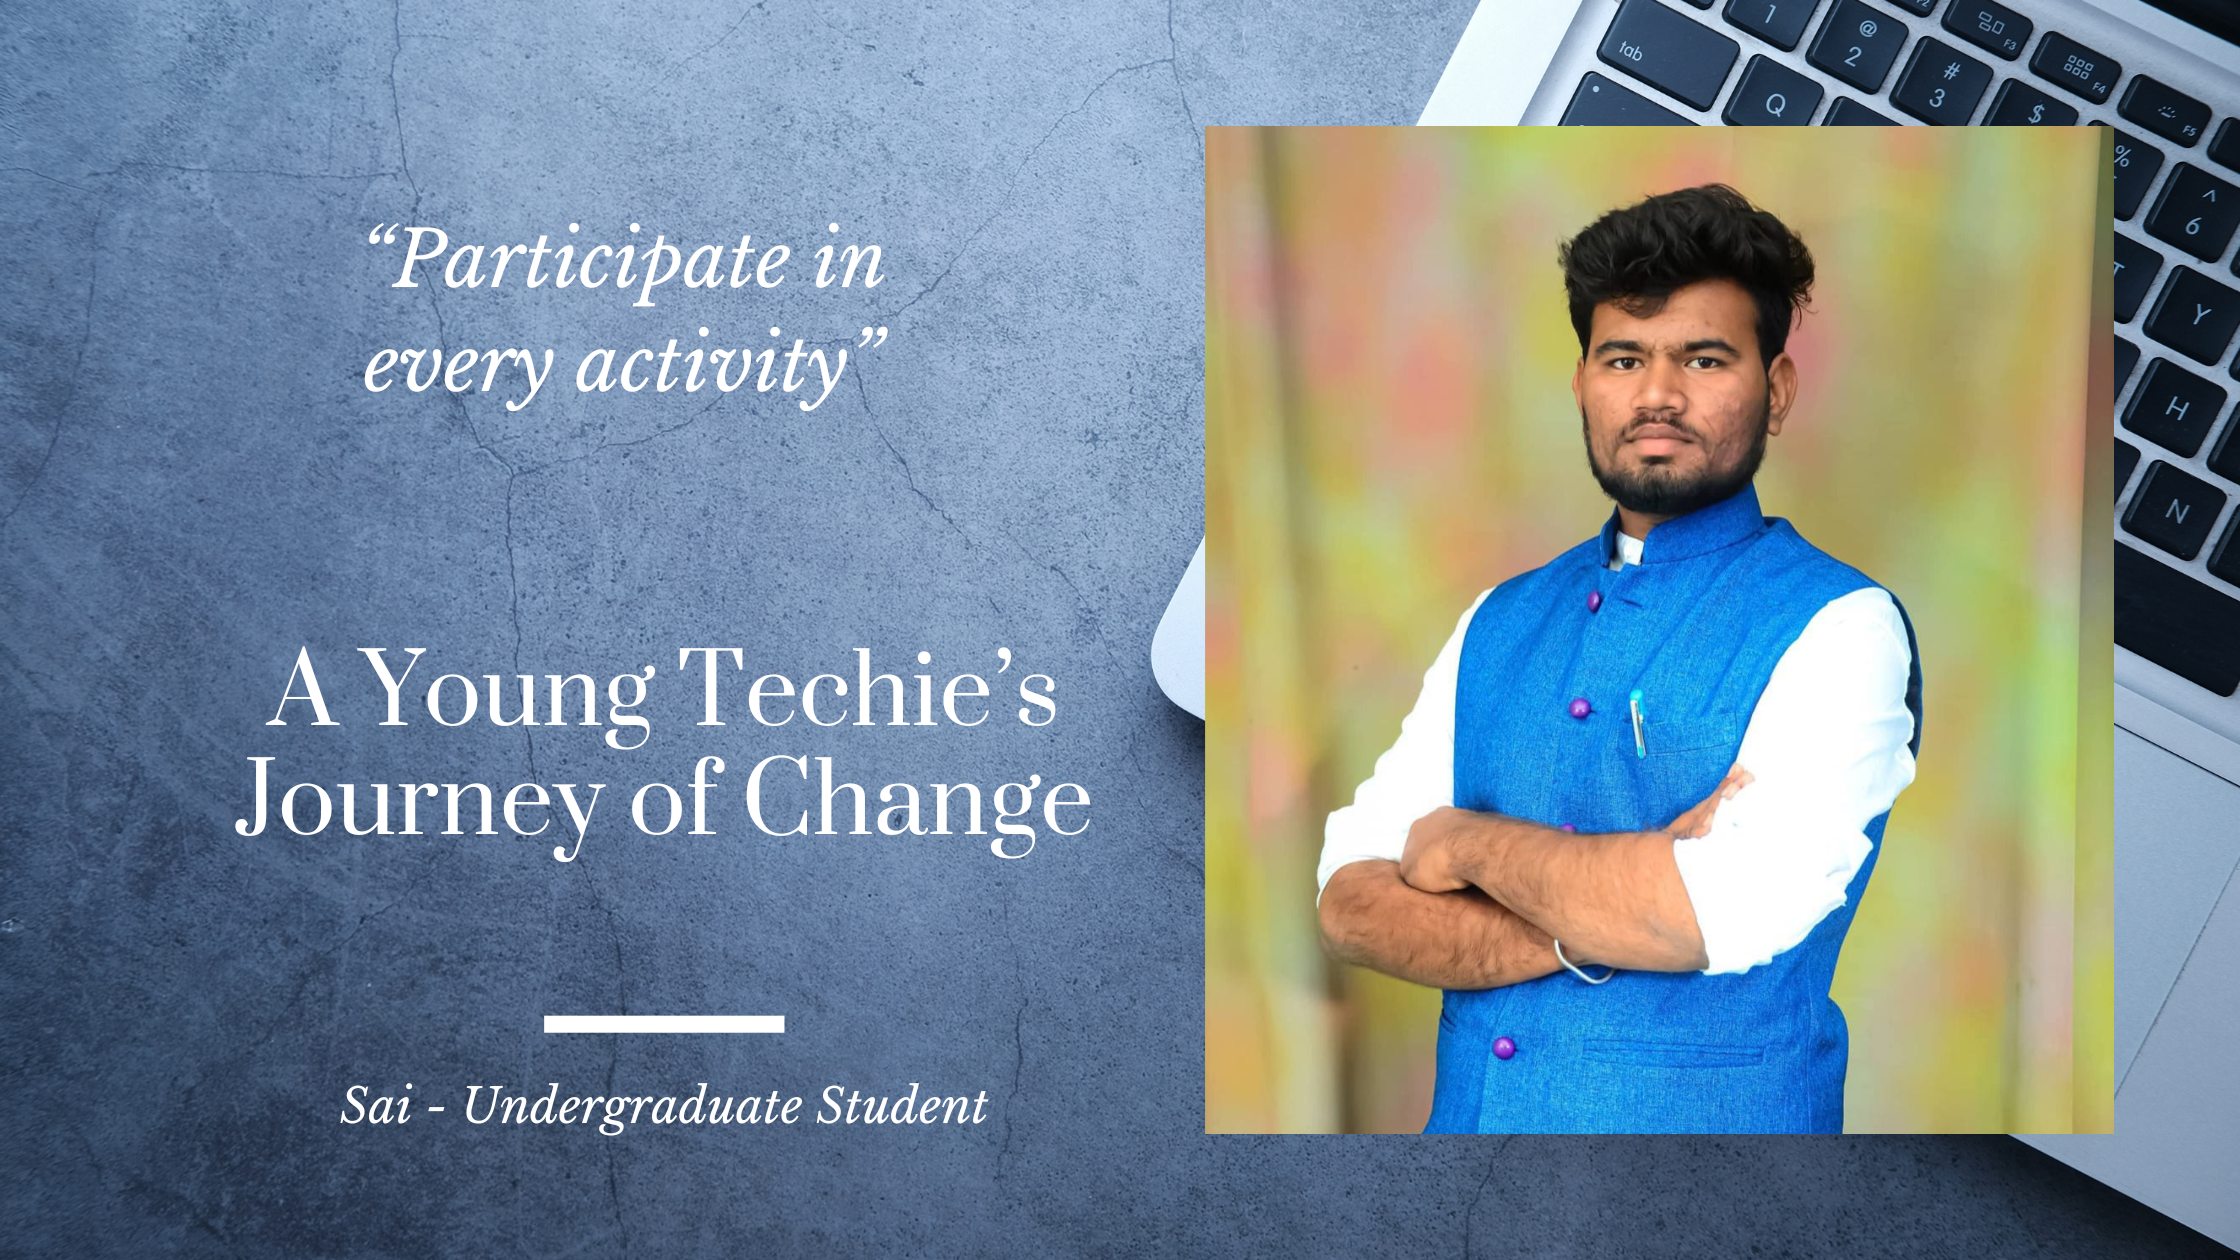 A Young Techie’s Journey of Change